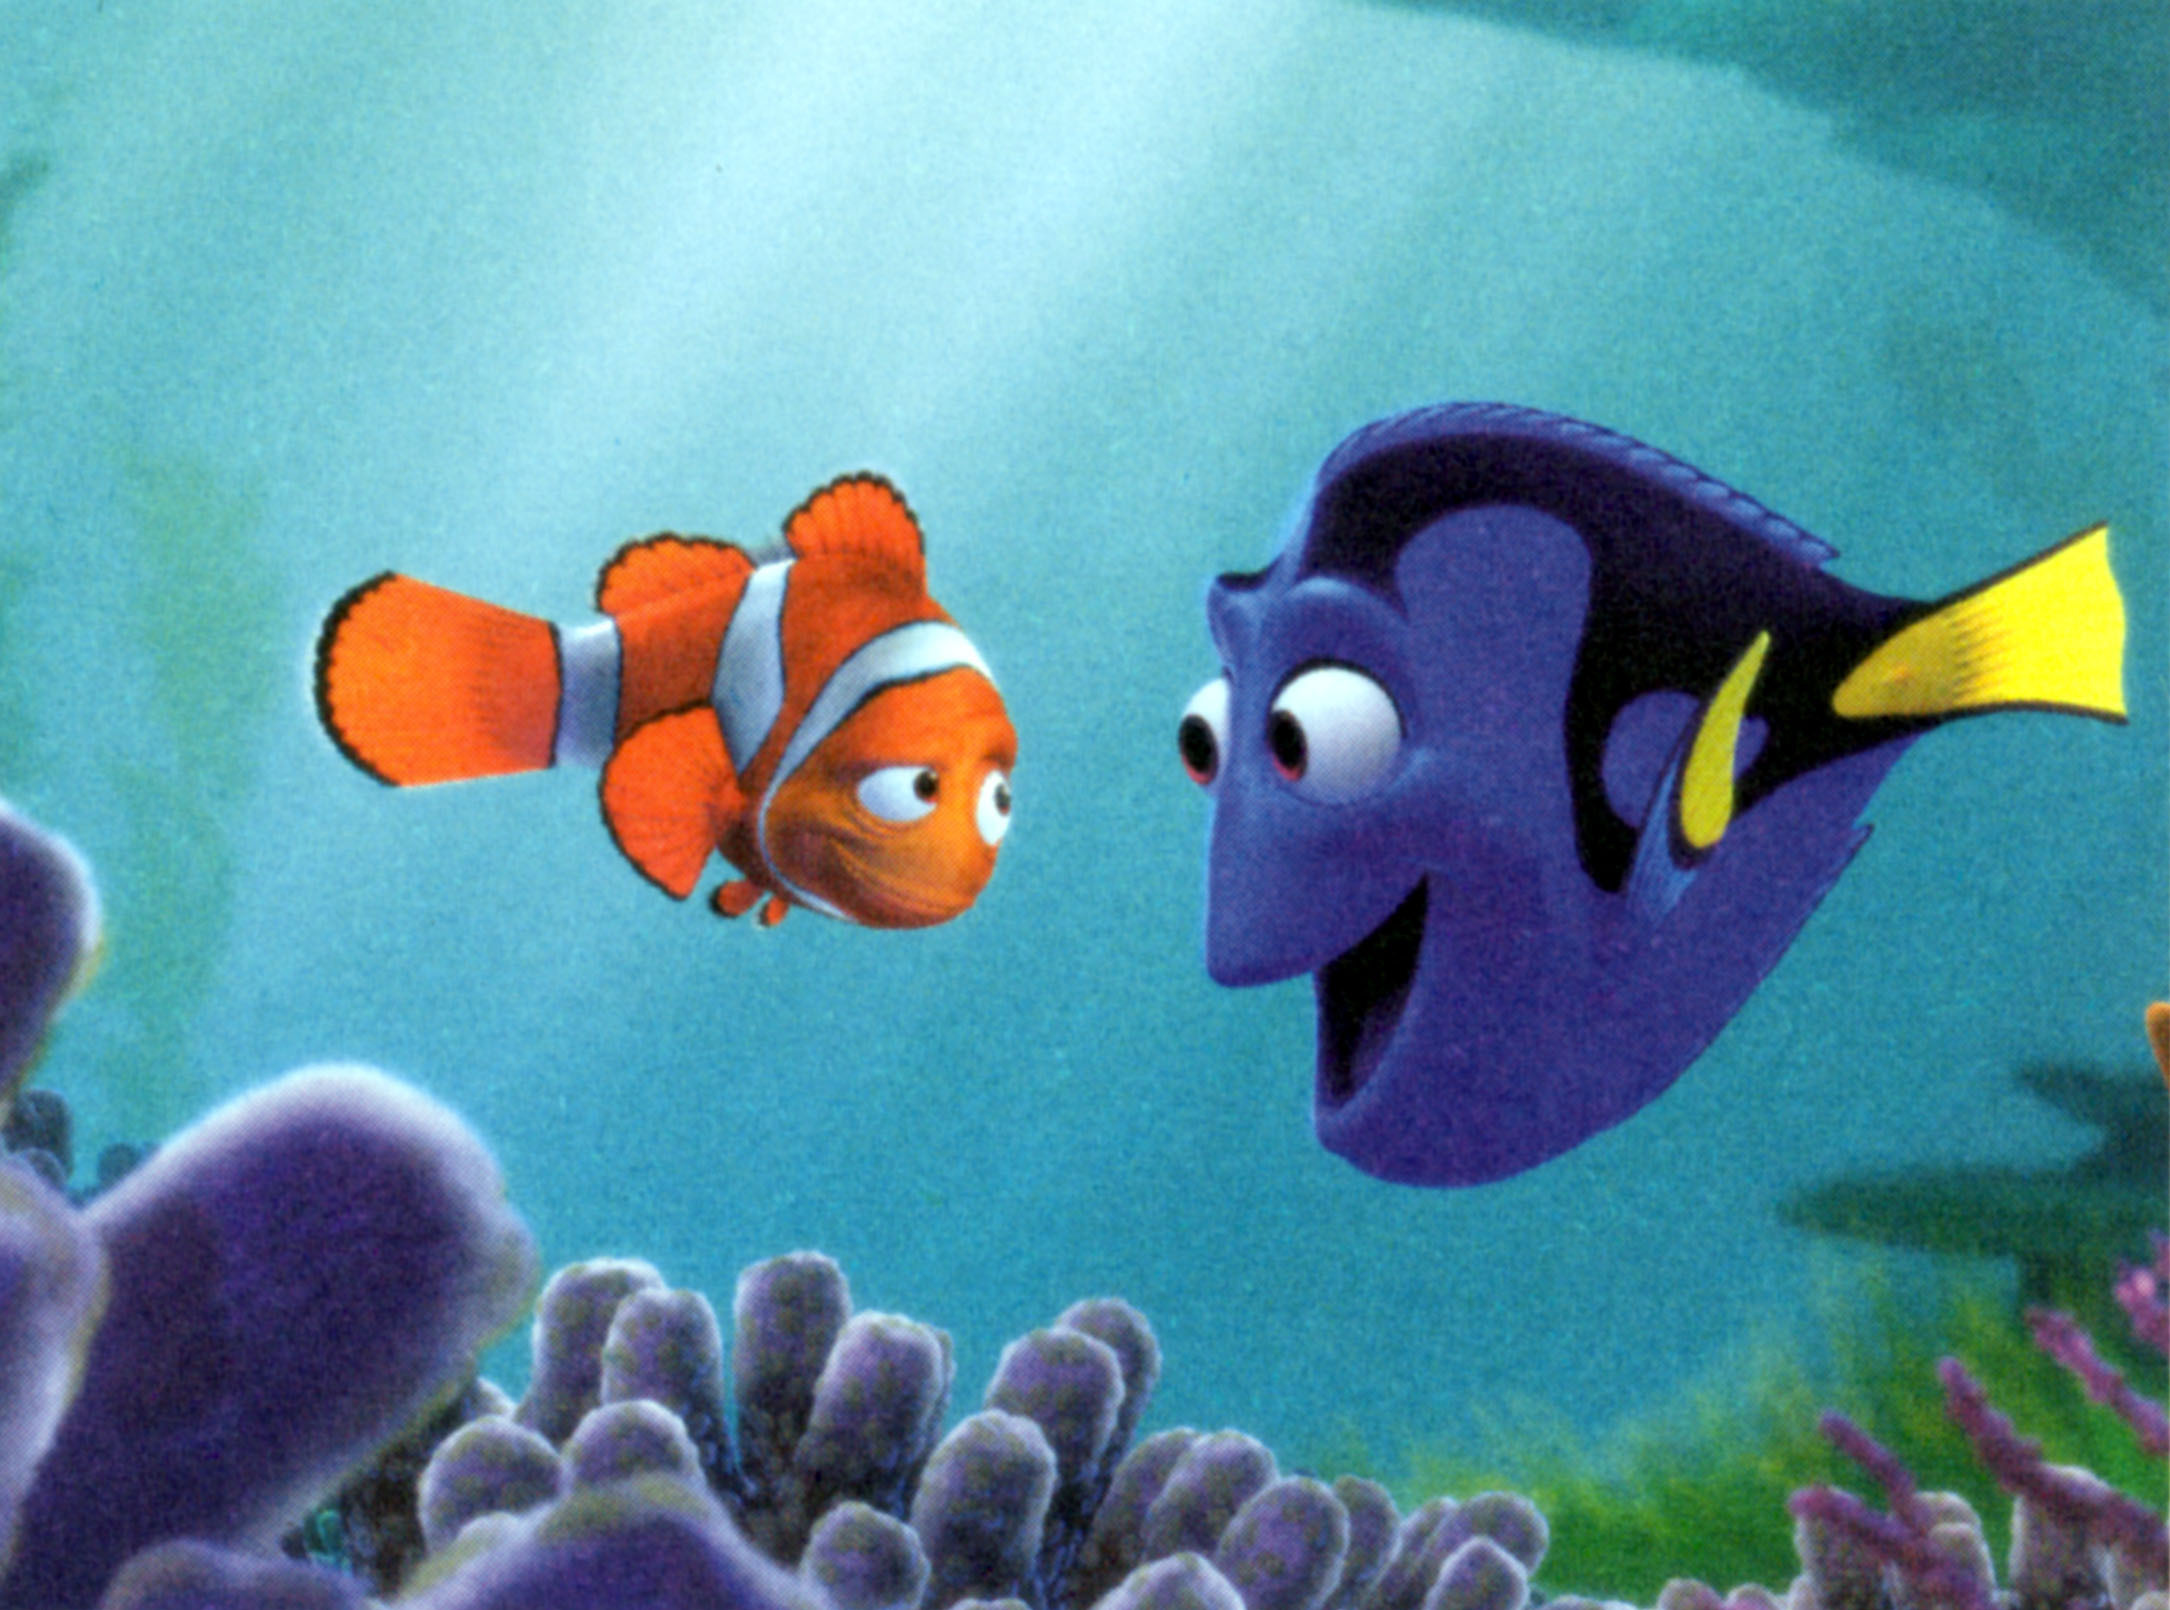 Finding Dory download the last version for ios